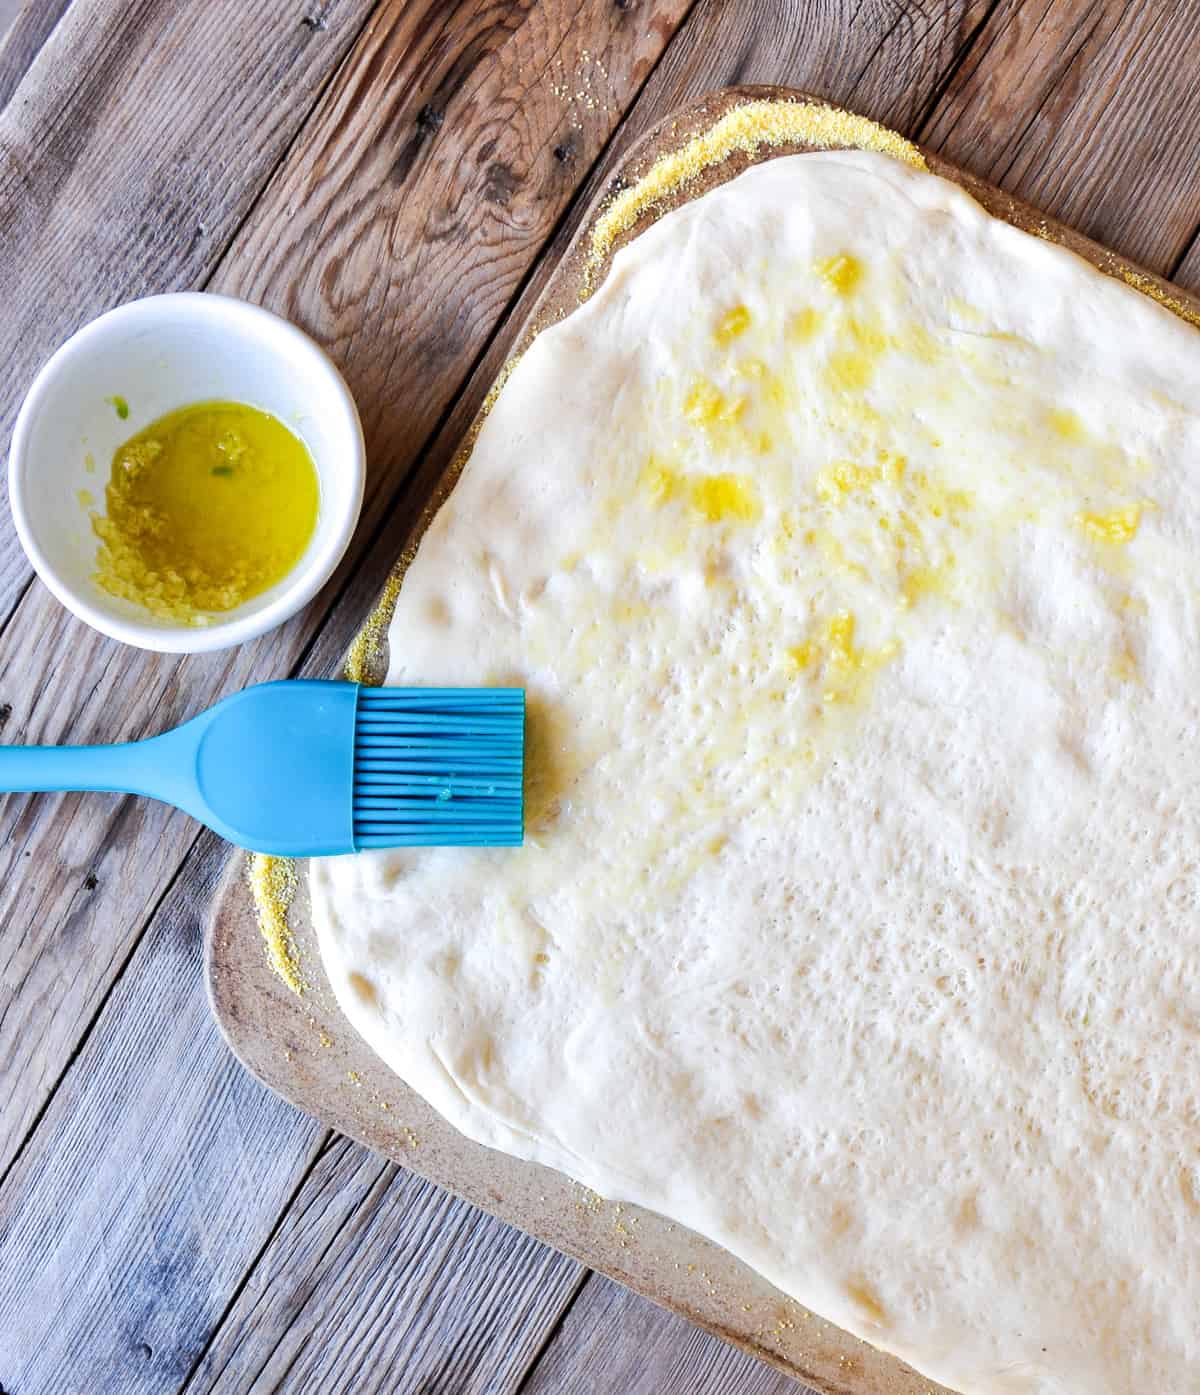 Brush the dough with garlic-olive oil mixture